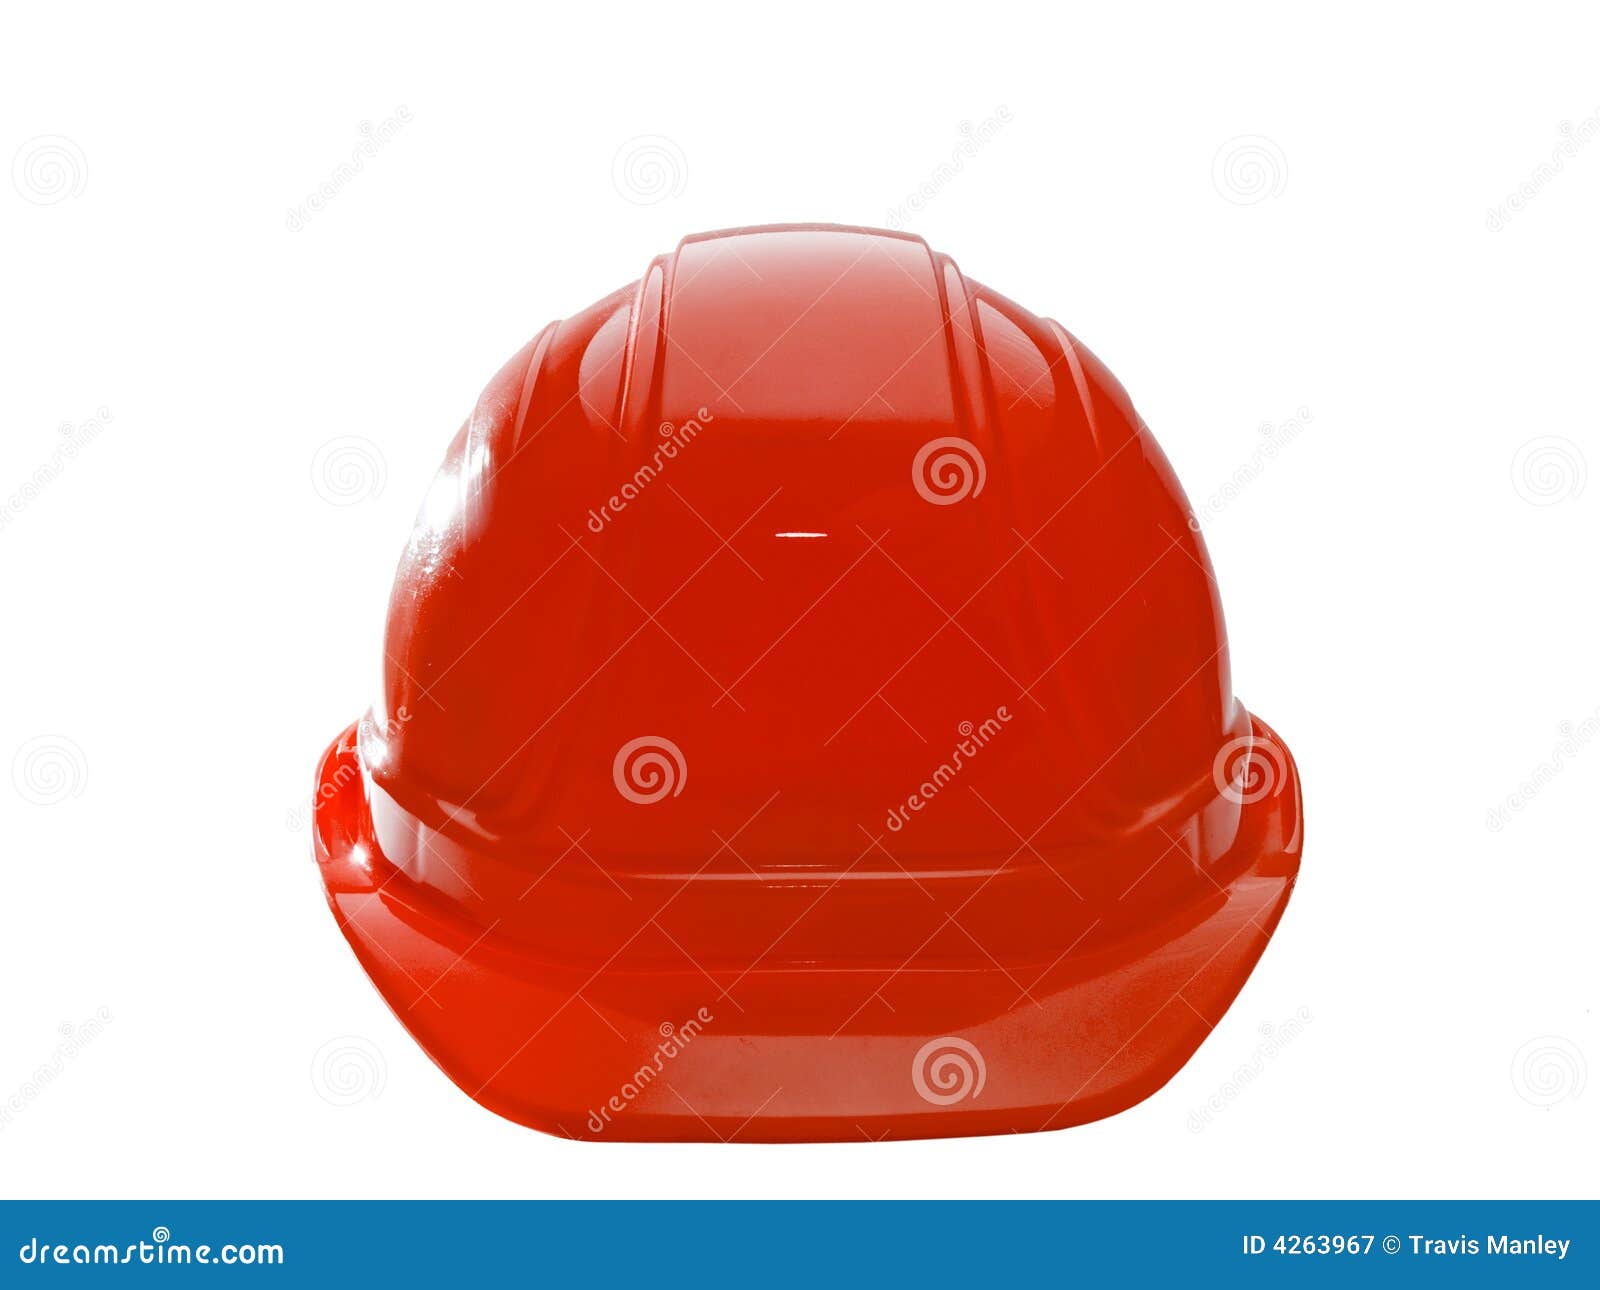 red hard hat clipart - photo #19